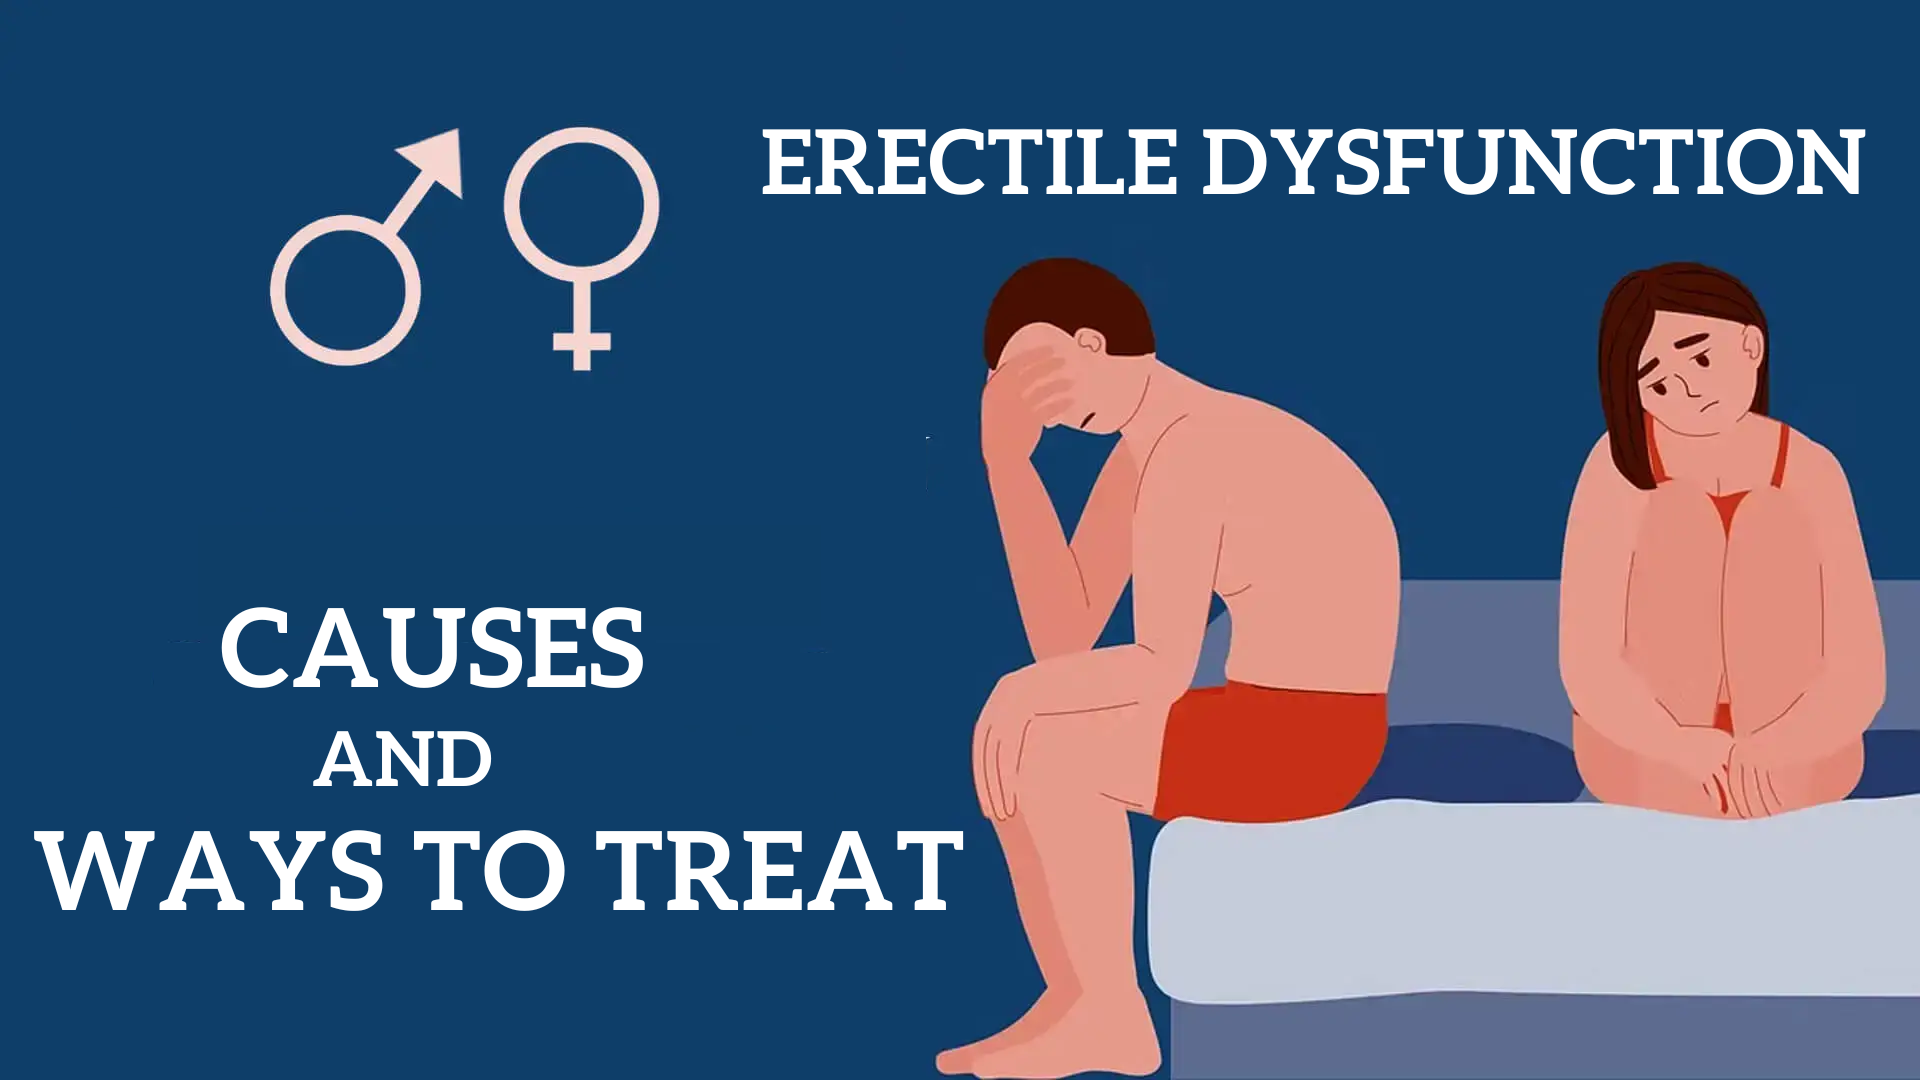 Erectile Dysfunction Causes And Ways To Treat